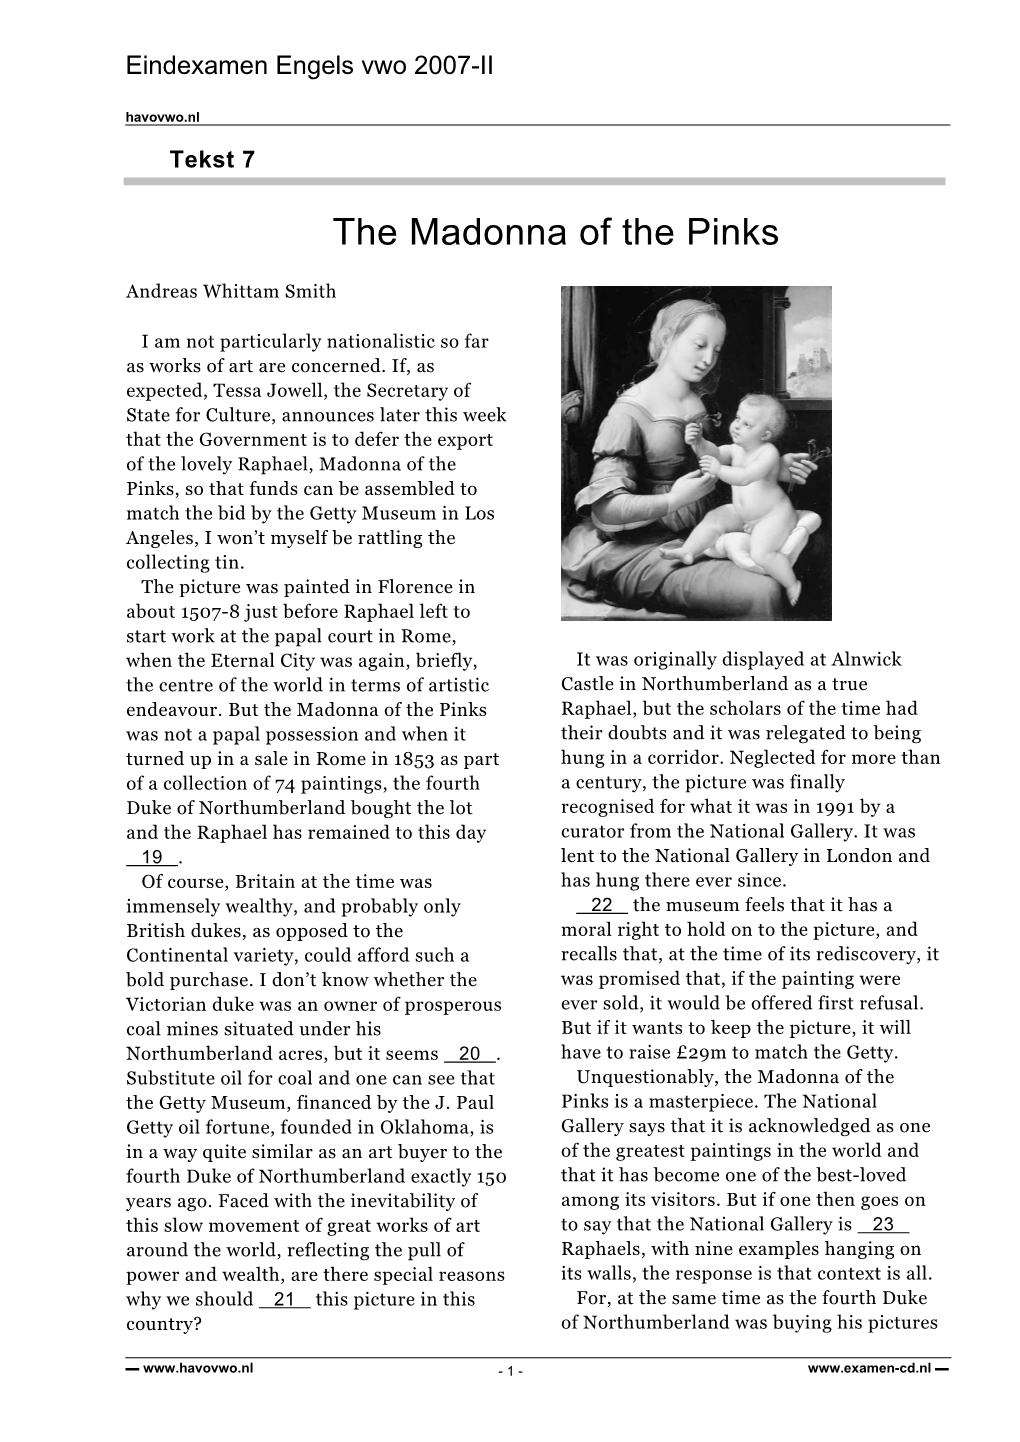 The Madonna of the Pinks